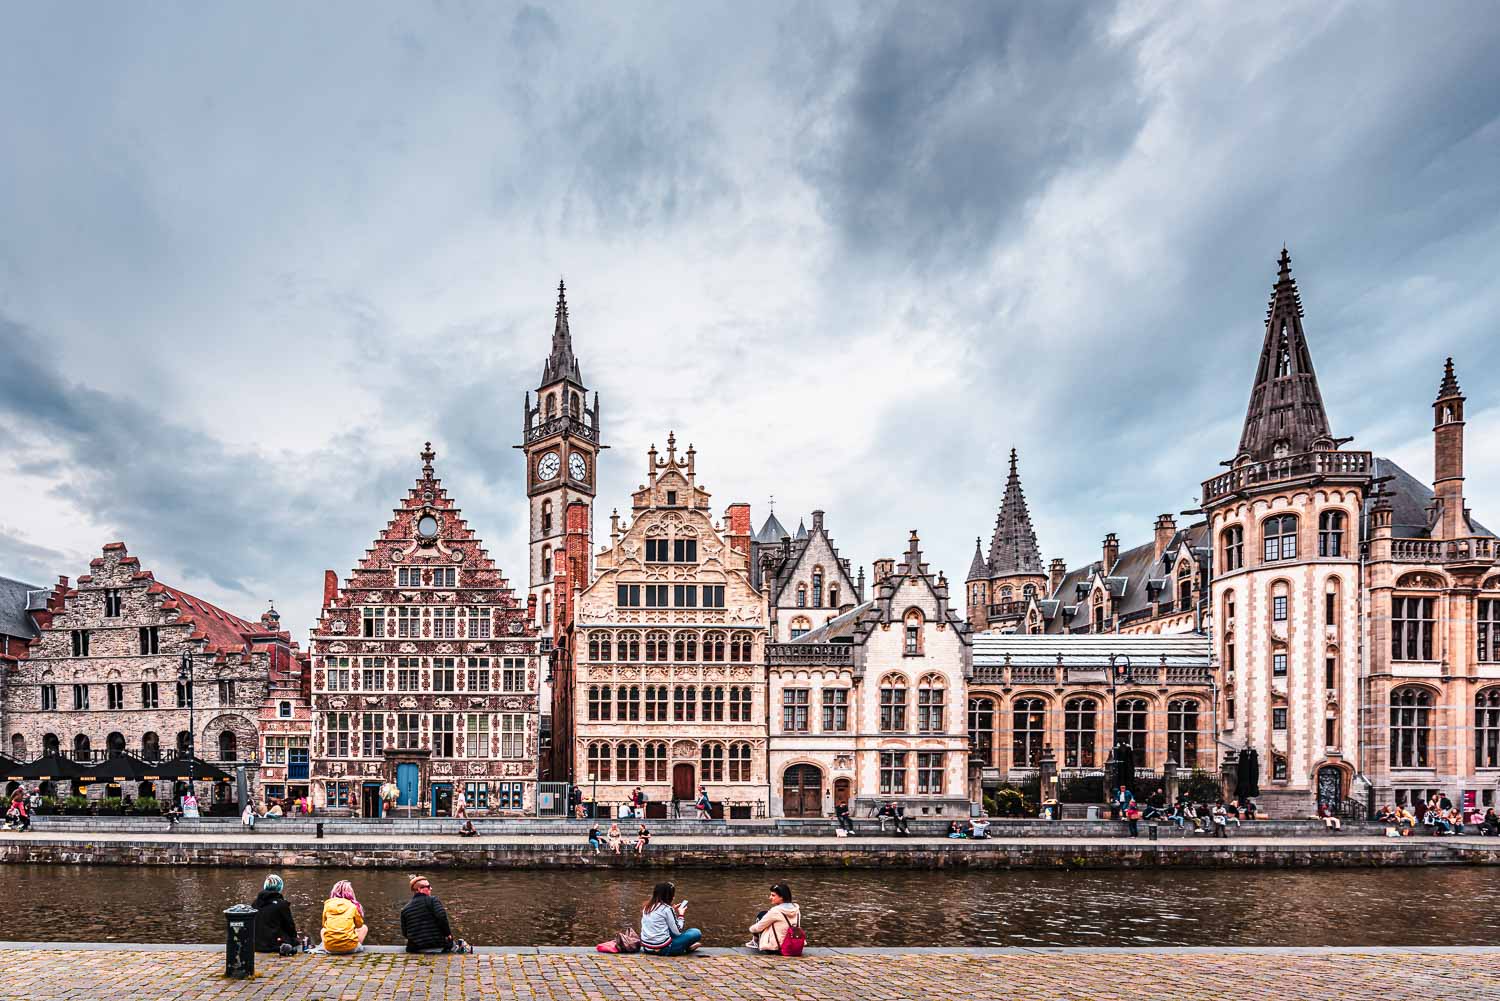 Historic buildings in the city of Ghent